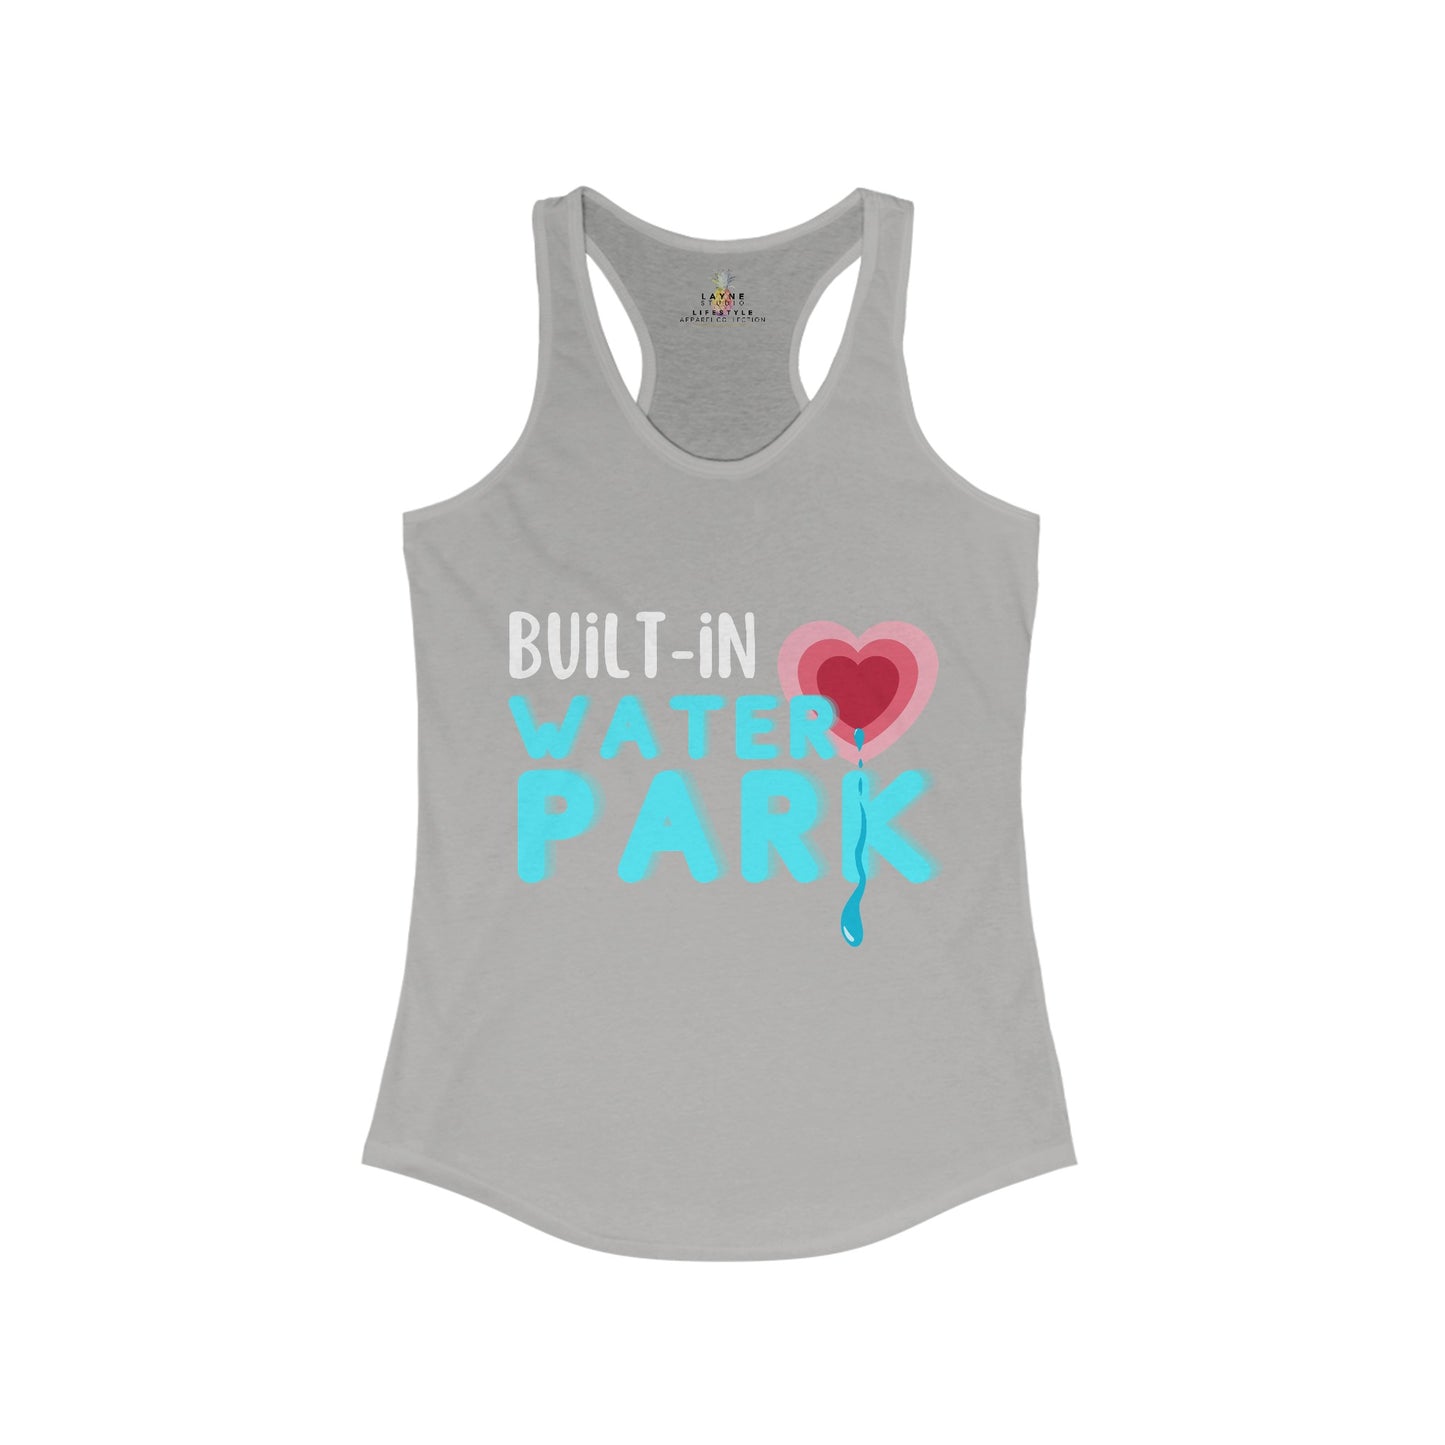 Front View of Layne Studios "Built-In Water Park" Graphic Heather Gray Racerback Tank-Top